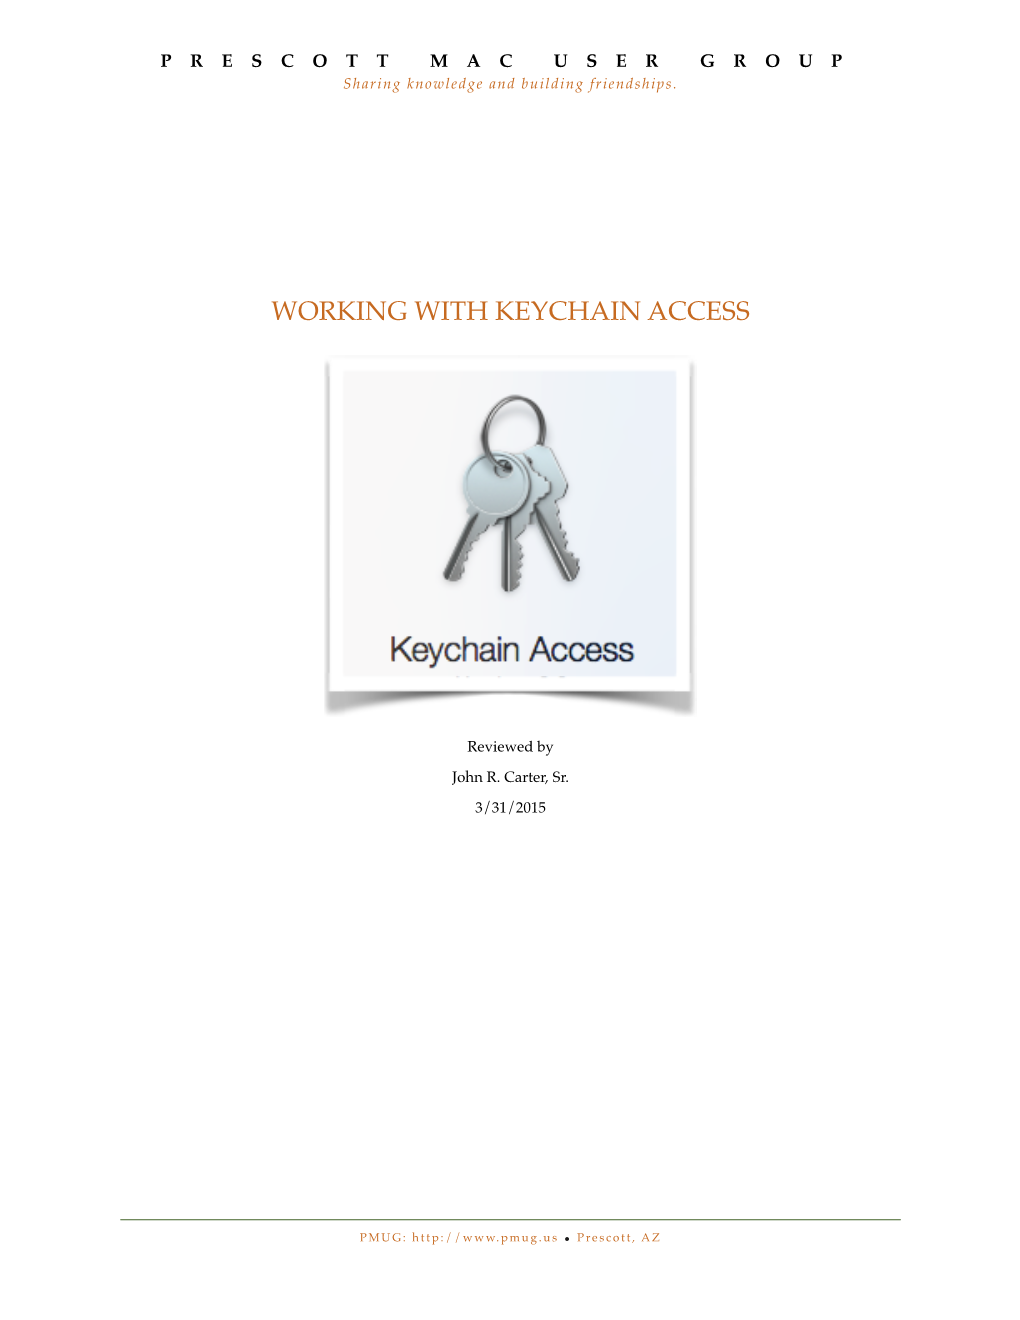 Working with Keychain Access